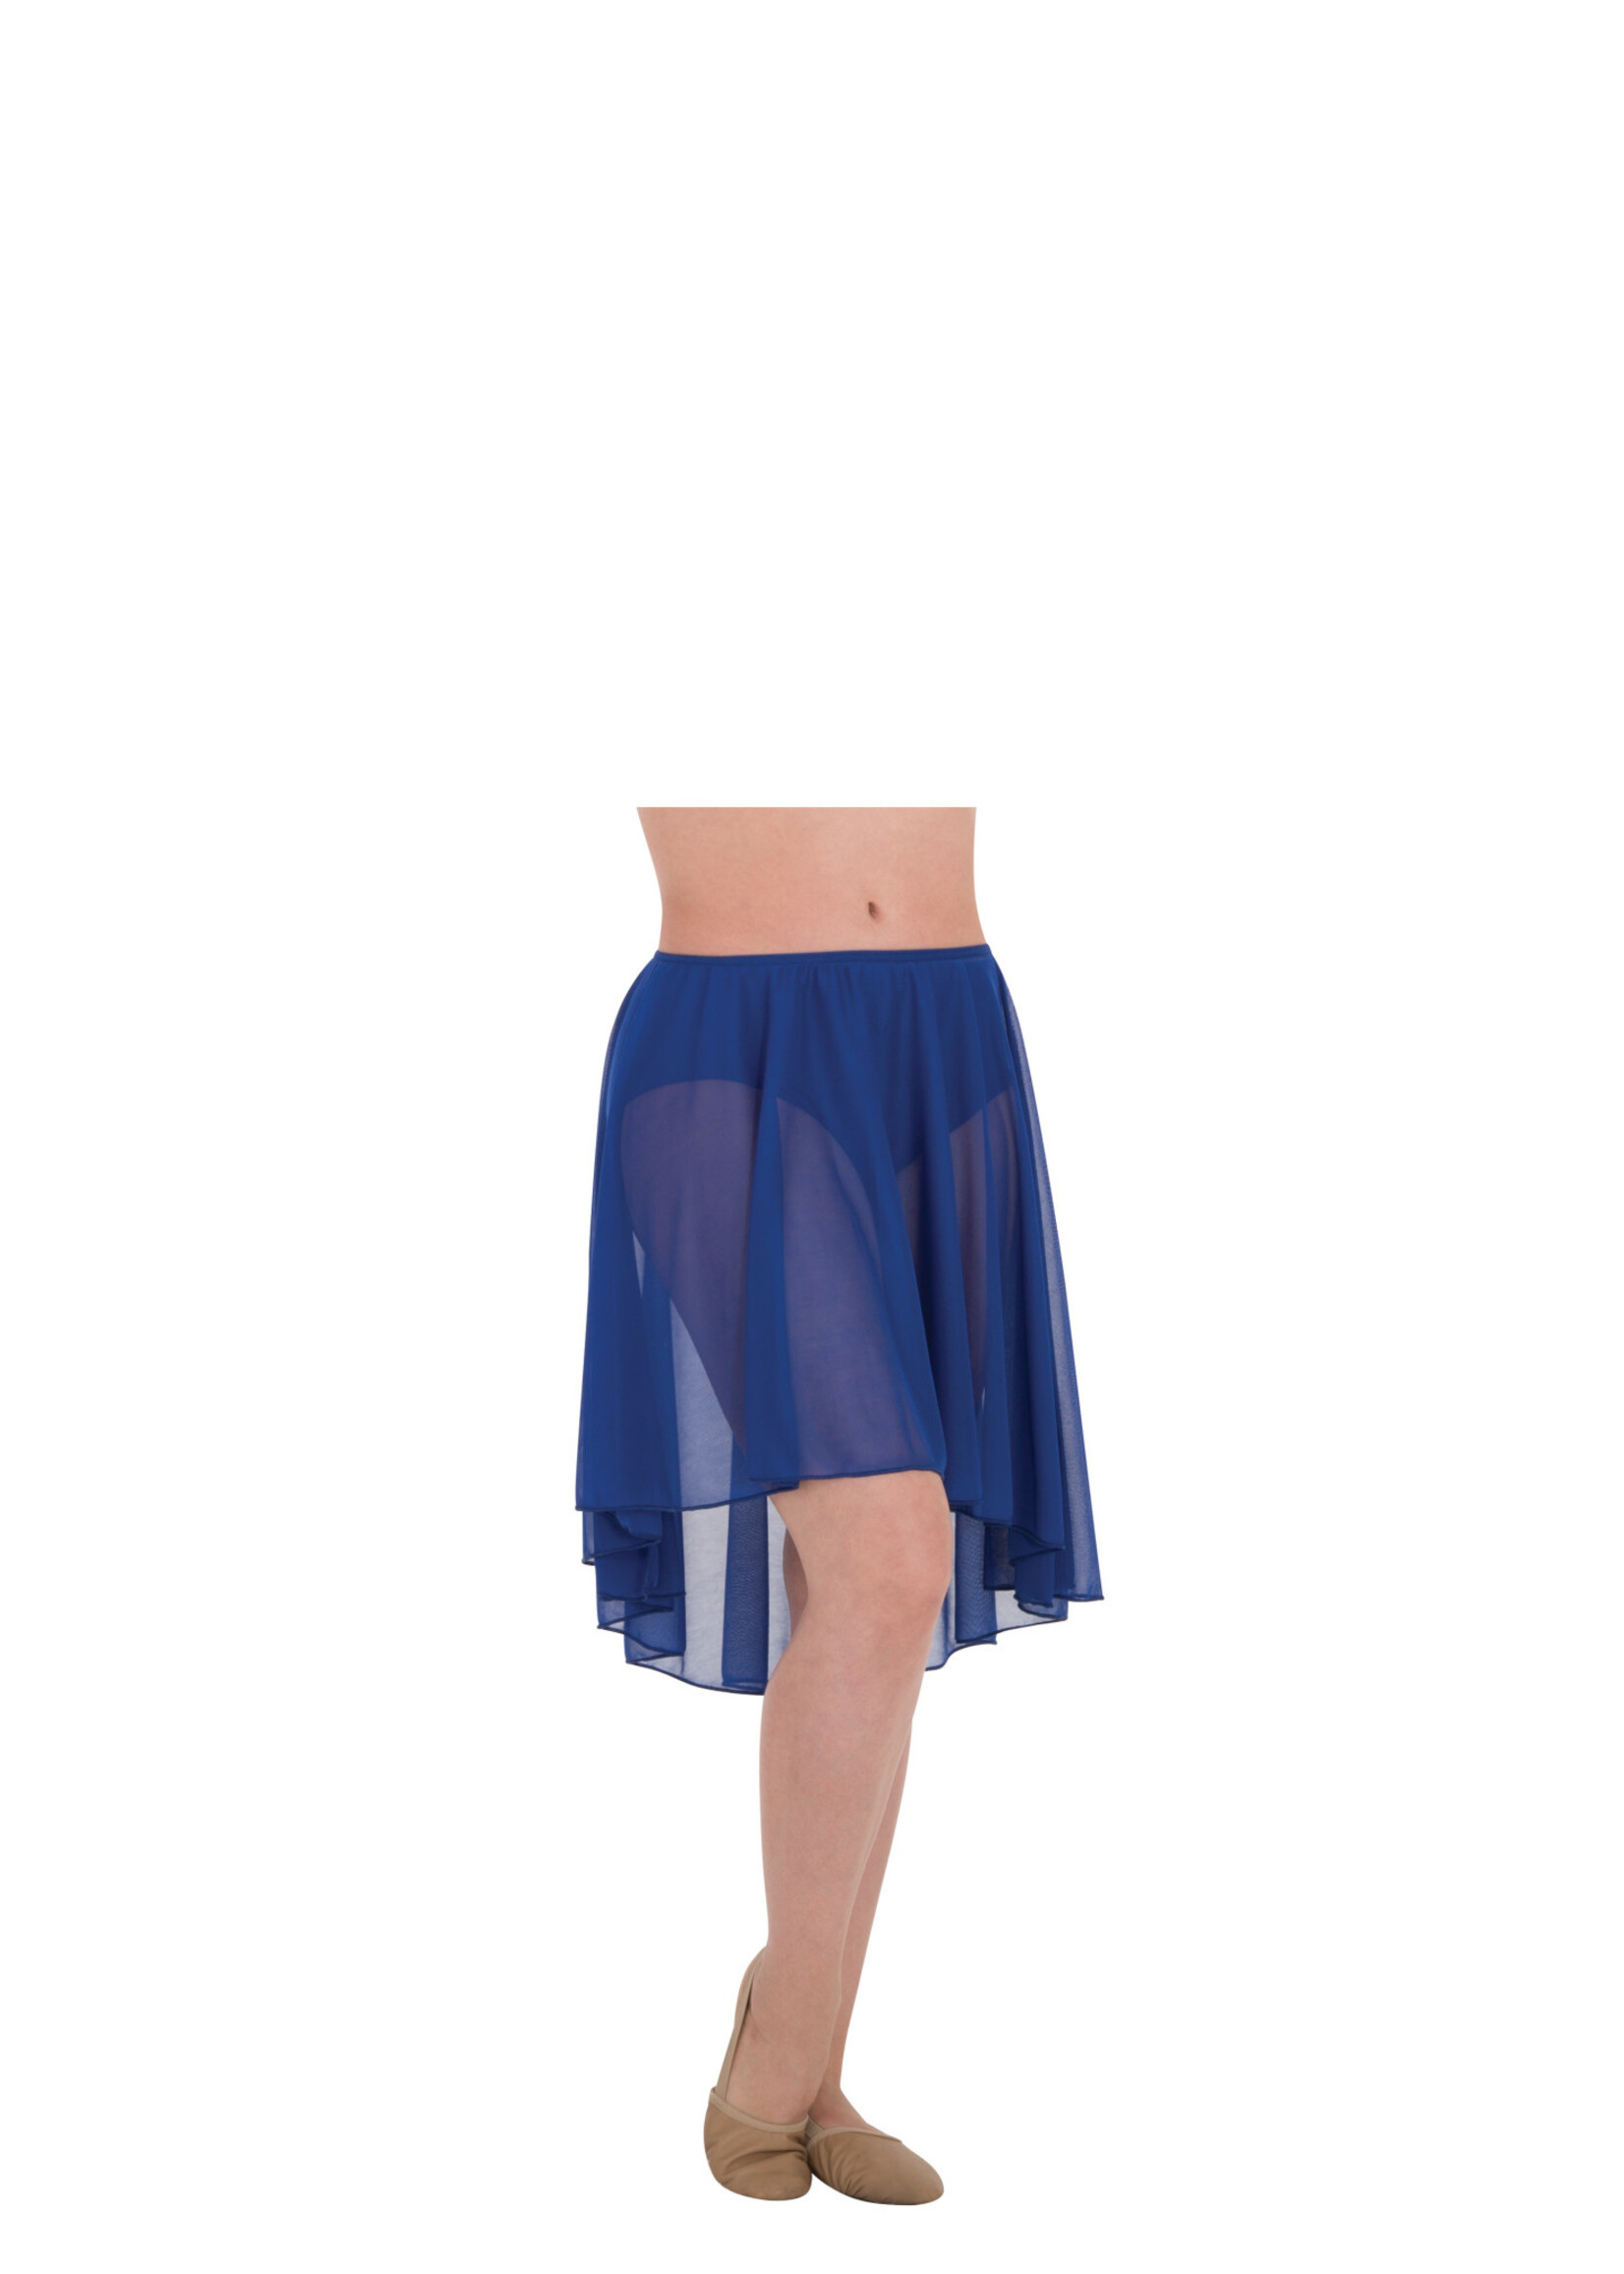 Body Wrappers Body Wrappers Womens Hi-Lo Skirt, PS, DRY, 989